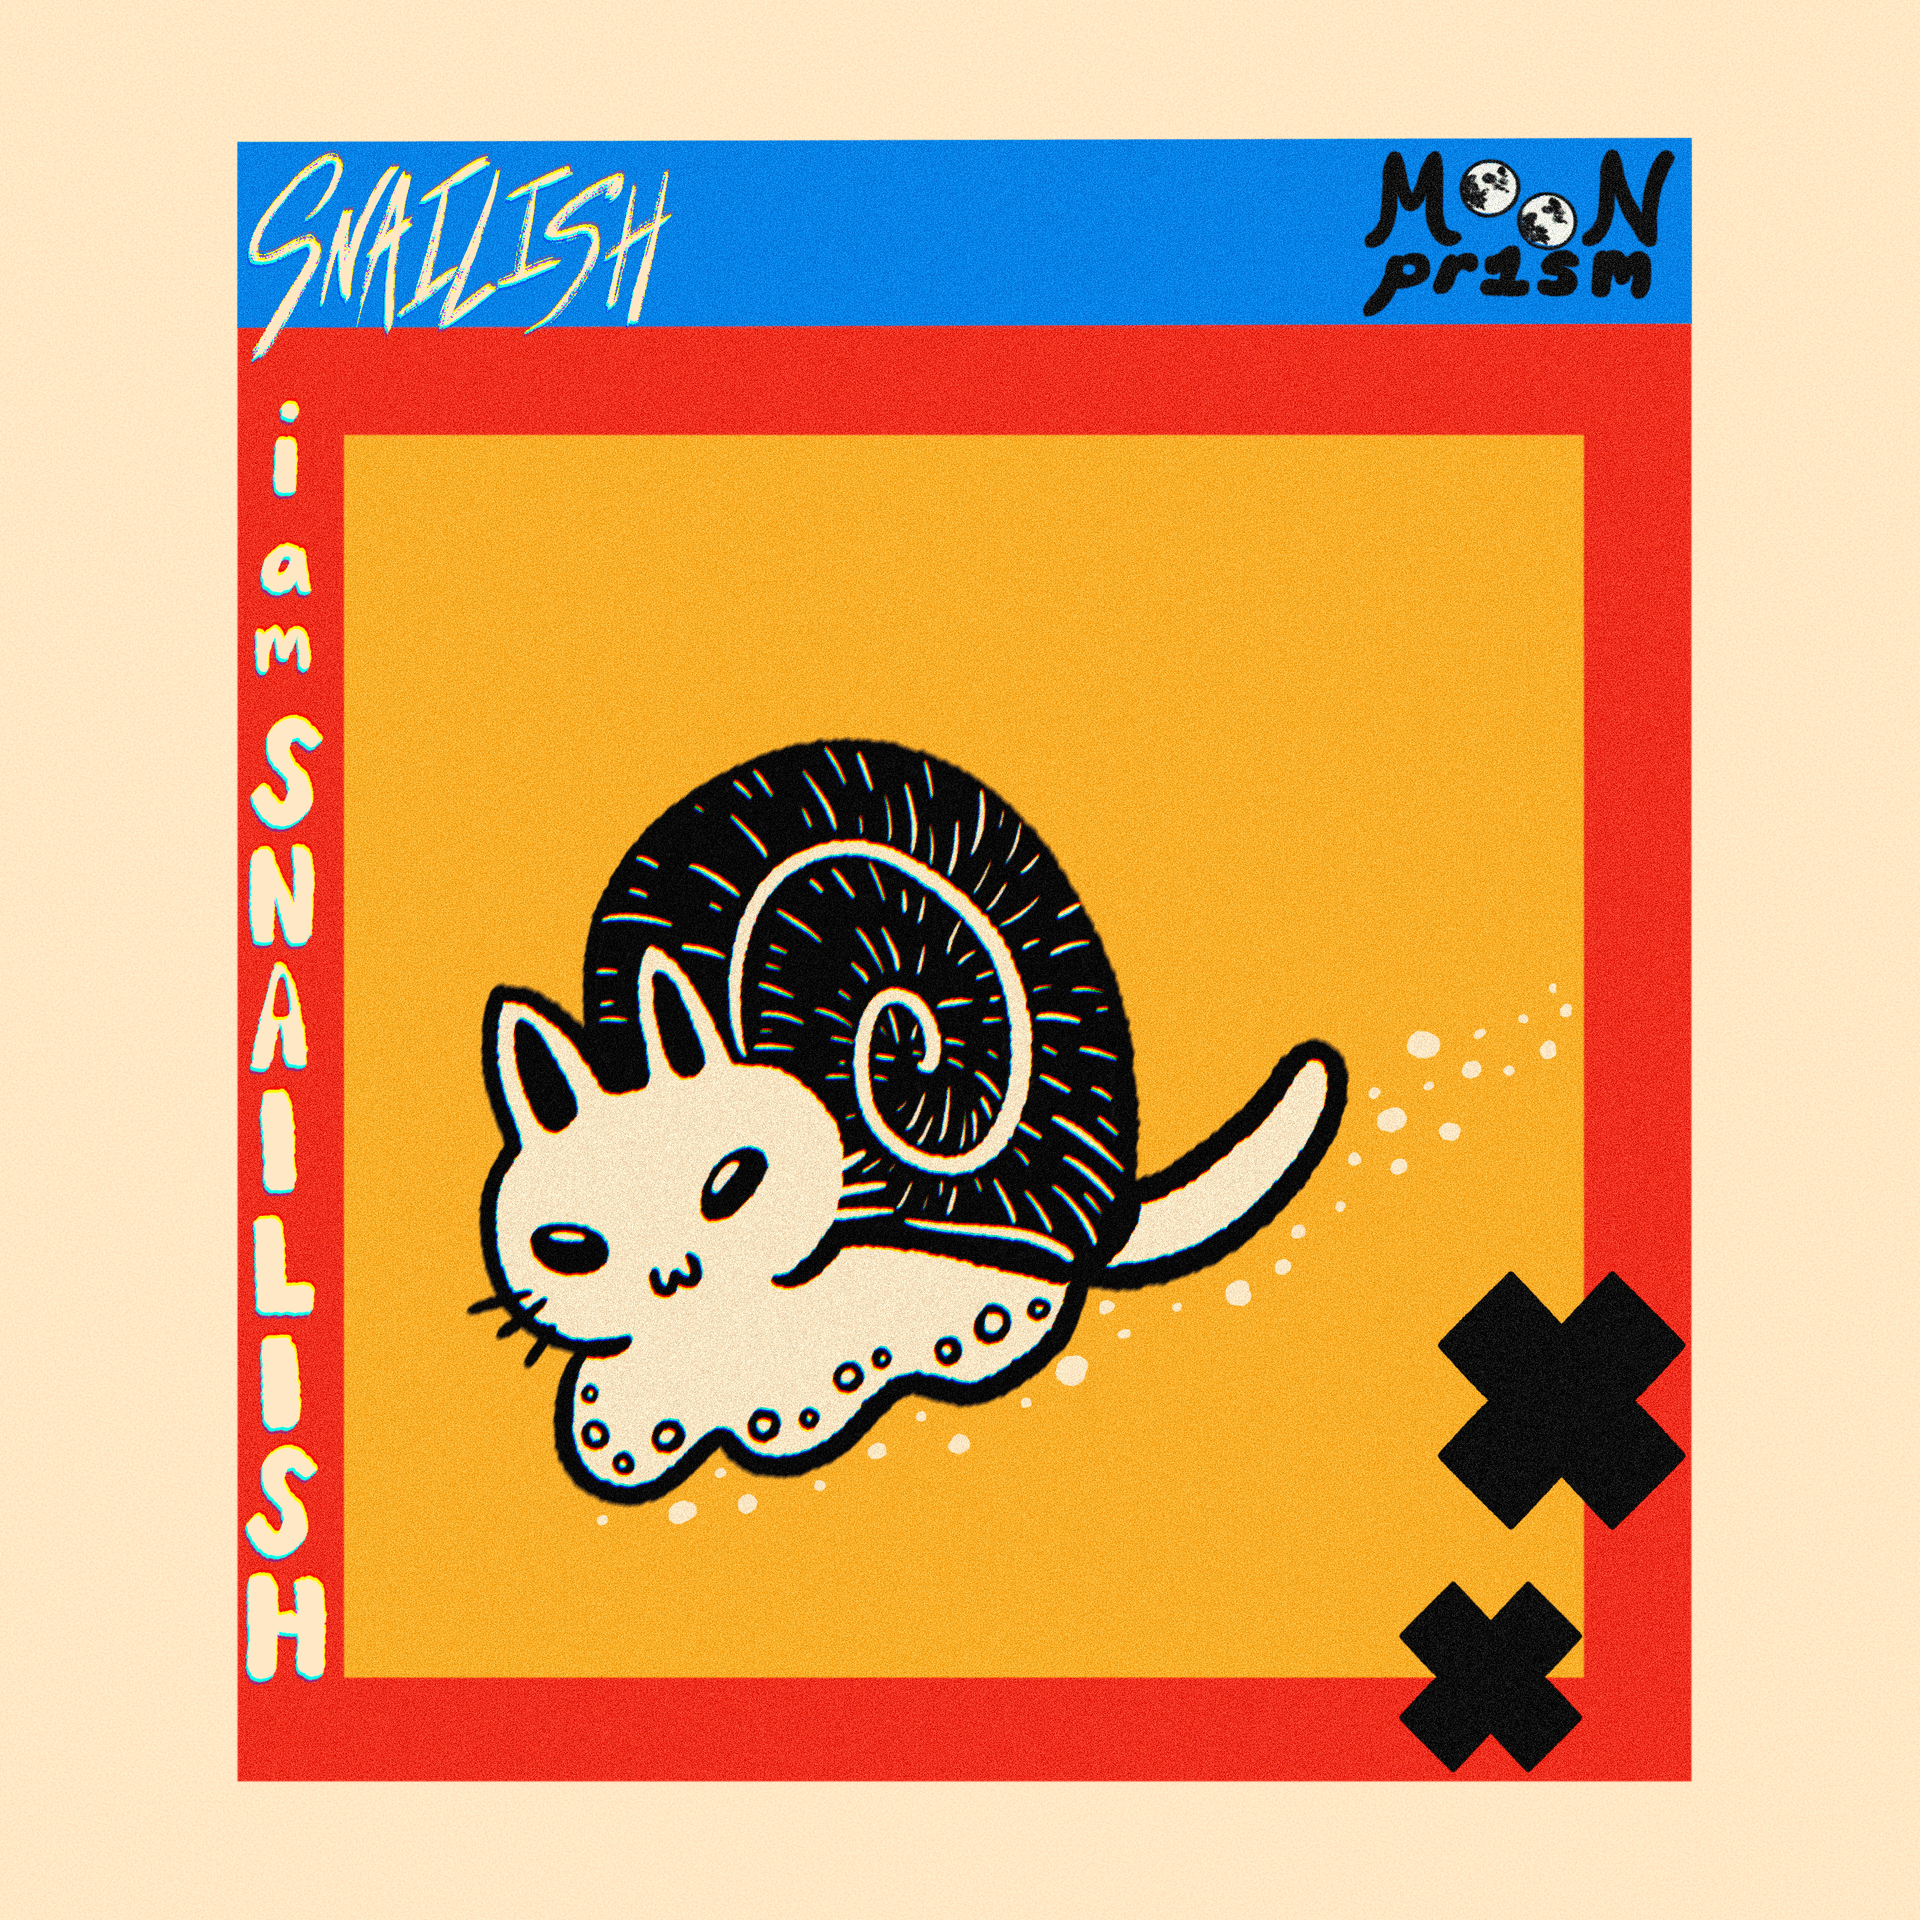 An illustration of 'Snailish', a snail-cat hybrid character. He is on a yellow, red, and blue square background with the words 'I am Snailish' on the side.